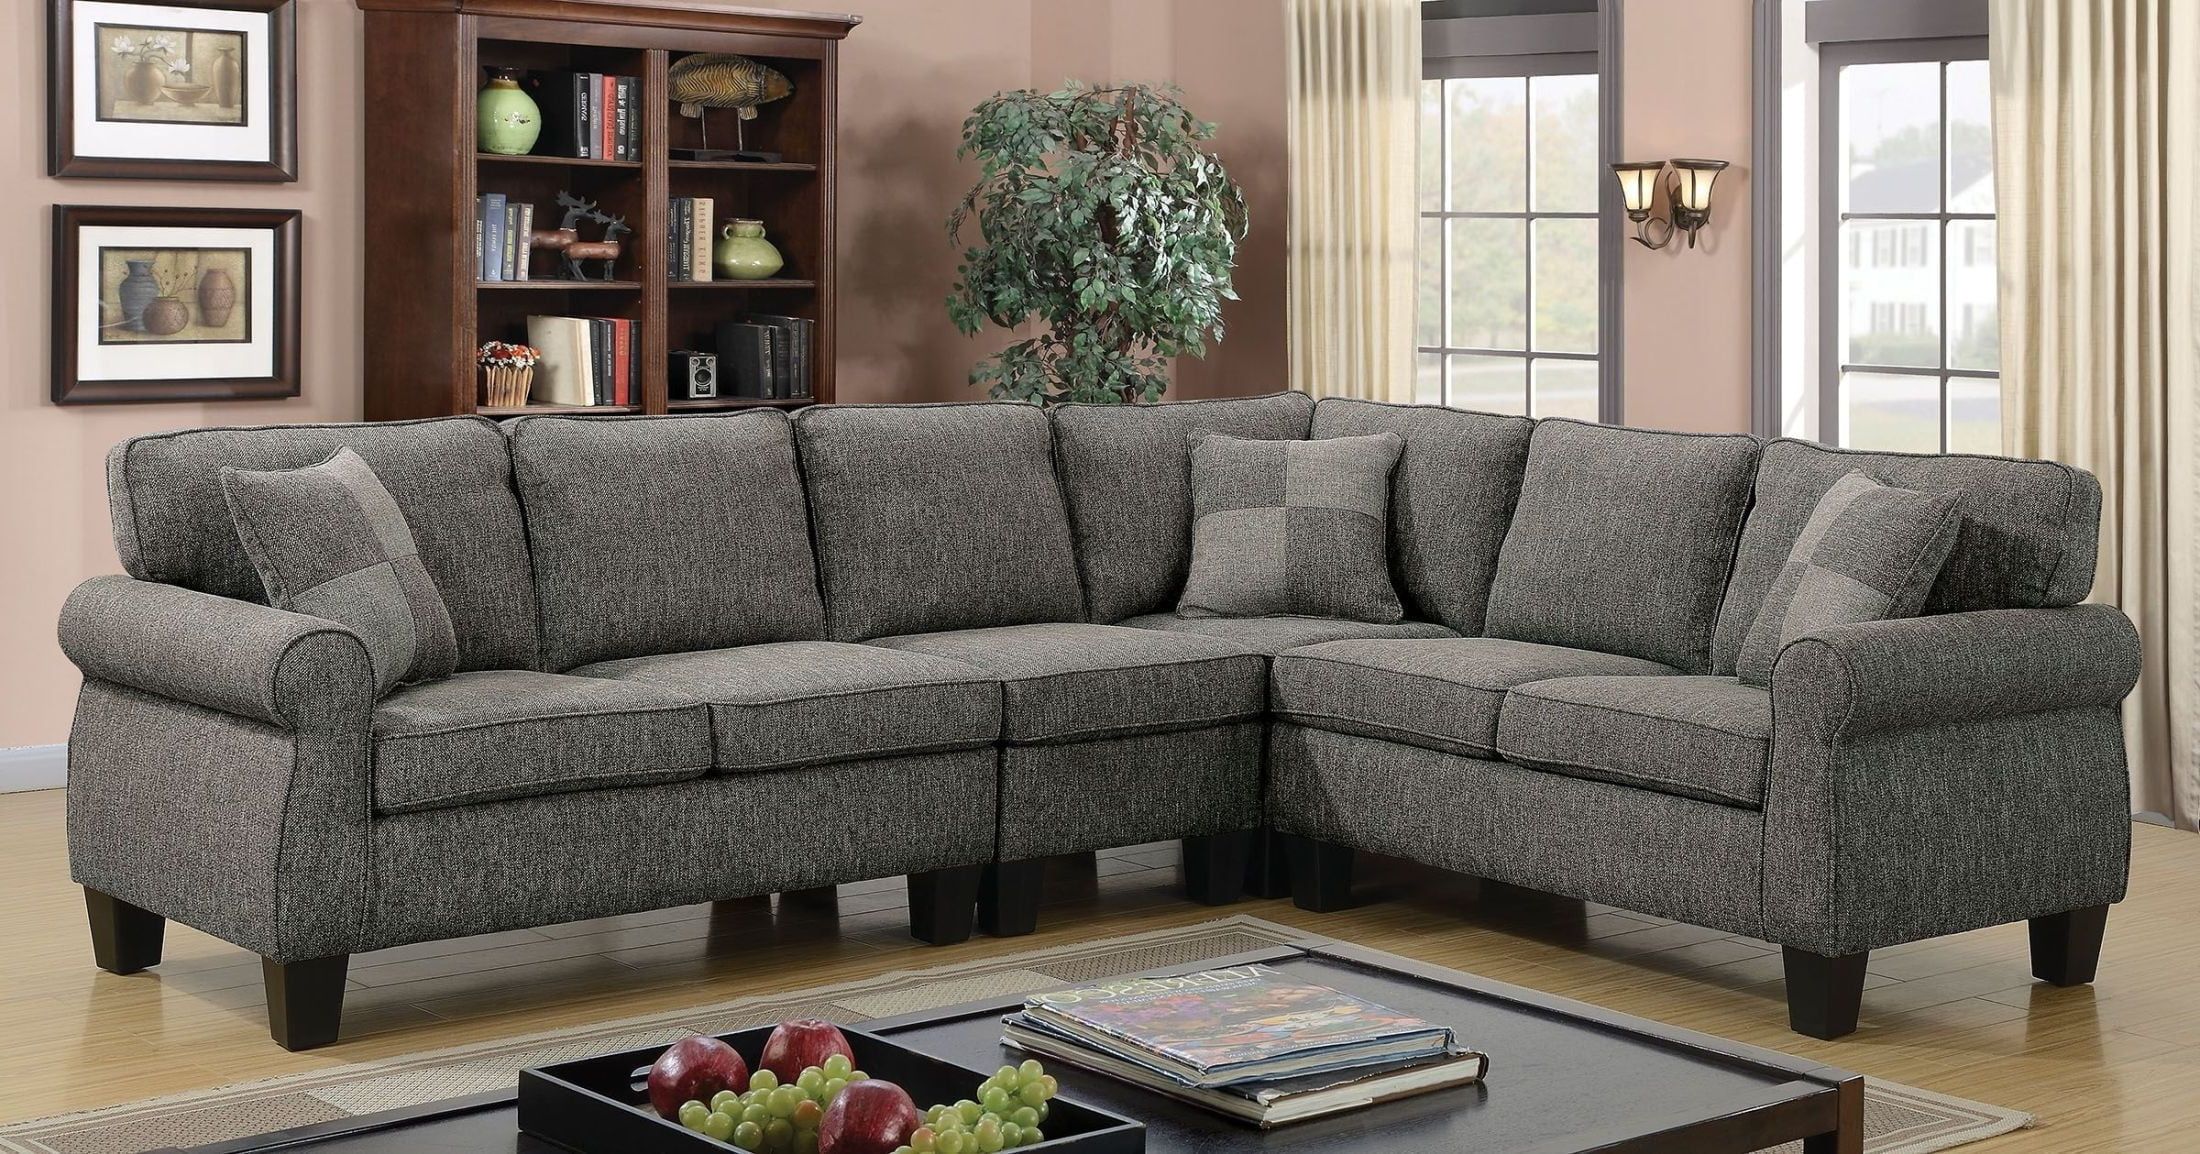 Trendy Dark Gray Sectional Sofas Pertaining To Rhian Dark Gray Sectional From Furniture Of America (View 3 of 15)